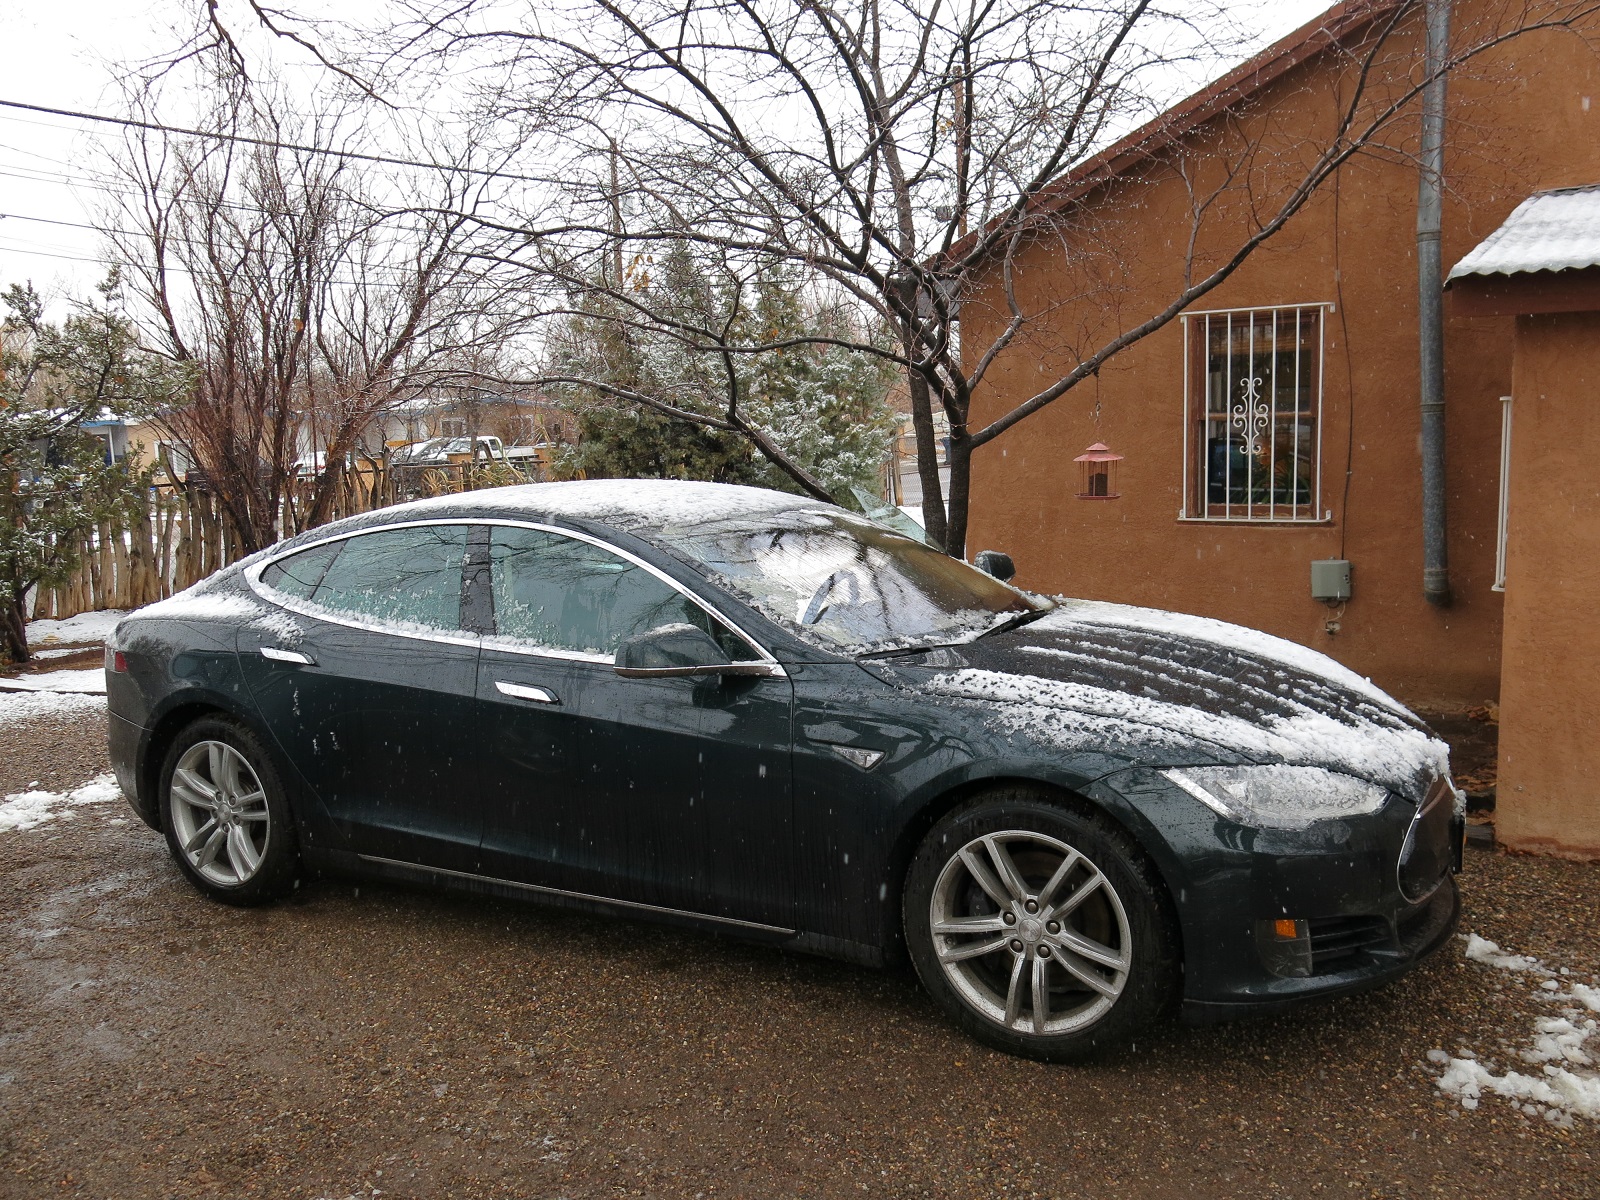 Understanding Battery Degradation in Electric Vehicles: A Comprehensive Case Study of a Tesla Model S P85+ and How to Address it